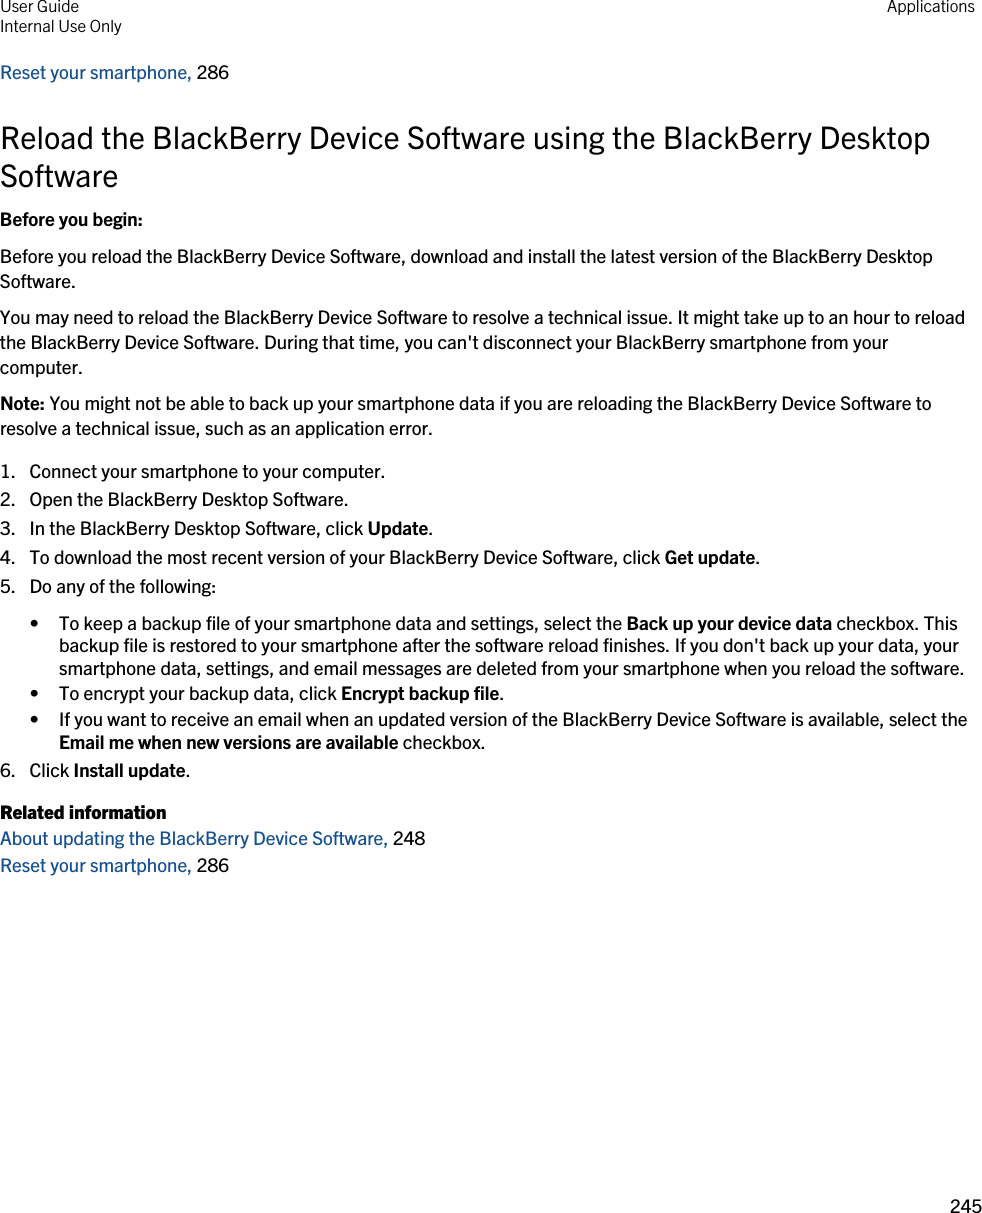 Reset your smartphone, 286Reload the BlackBerry Device Software using the BlackBerry Desktop SoftwareBefore you begin: Before you reload the BlackBerry Device Software, download and install the latest version of the BlackBerry Desktop Software.You may need to reload the BlackBerry Device Software to resolve a technical issue. It might take up to an hour to reload the BlackBerry Device Software. During that time, you can&apos;t disconnect your BlackBerry smartphone from your computer.Note: You might not be able to back up your smartphone data if you are reloading the BlackBerry Device Software to resolve a technical issue, such as an application error.1. Connect your smartphone to your computer.2. Open the BlackBerry Desktop Software.3. In the BlackBerry Desktop Software, click Update.4. To download the most recent version of your BlackBerry Device Software, click Get update.5. Do any of the following:• To keep a backup file of your smartphone data and settings, select the Back up your device data checkbox. This backup file is restored to your smartphone after the software reload finishes. If you don&apos;t back up your data, your smartphone data, settings, and email messages are deleted from your smartphone when you reload the software.• To encrypt your backup data, click Encrypt backup file.• If you want to receive an email when an updated version of the BlackBerry Device Software is available, select the Email me when new versions are available checkbox.6. Click Install update.Related informationAbout updating the BlackBerry Device Software, 248Reset your smartphone, 286User GuideInternal Use Only Applications245 